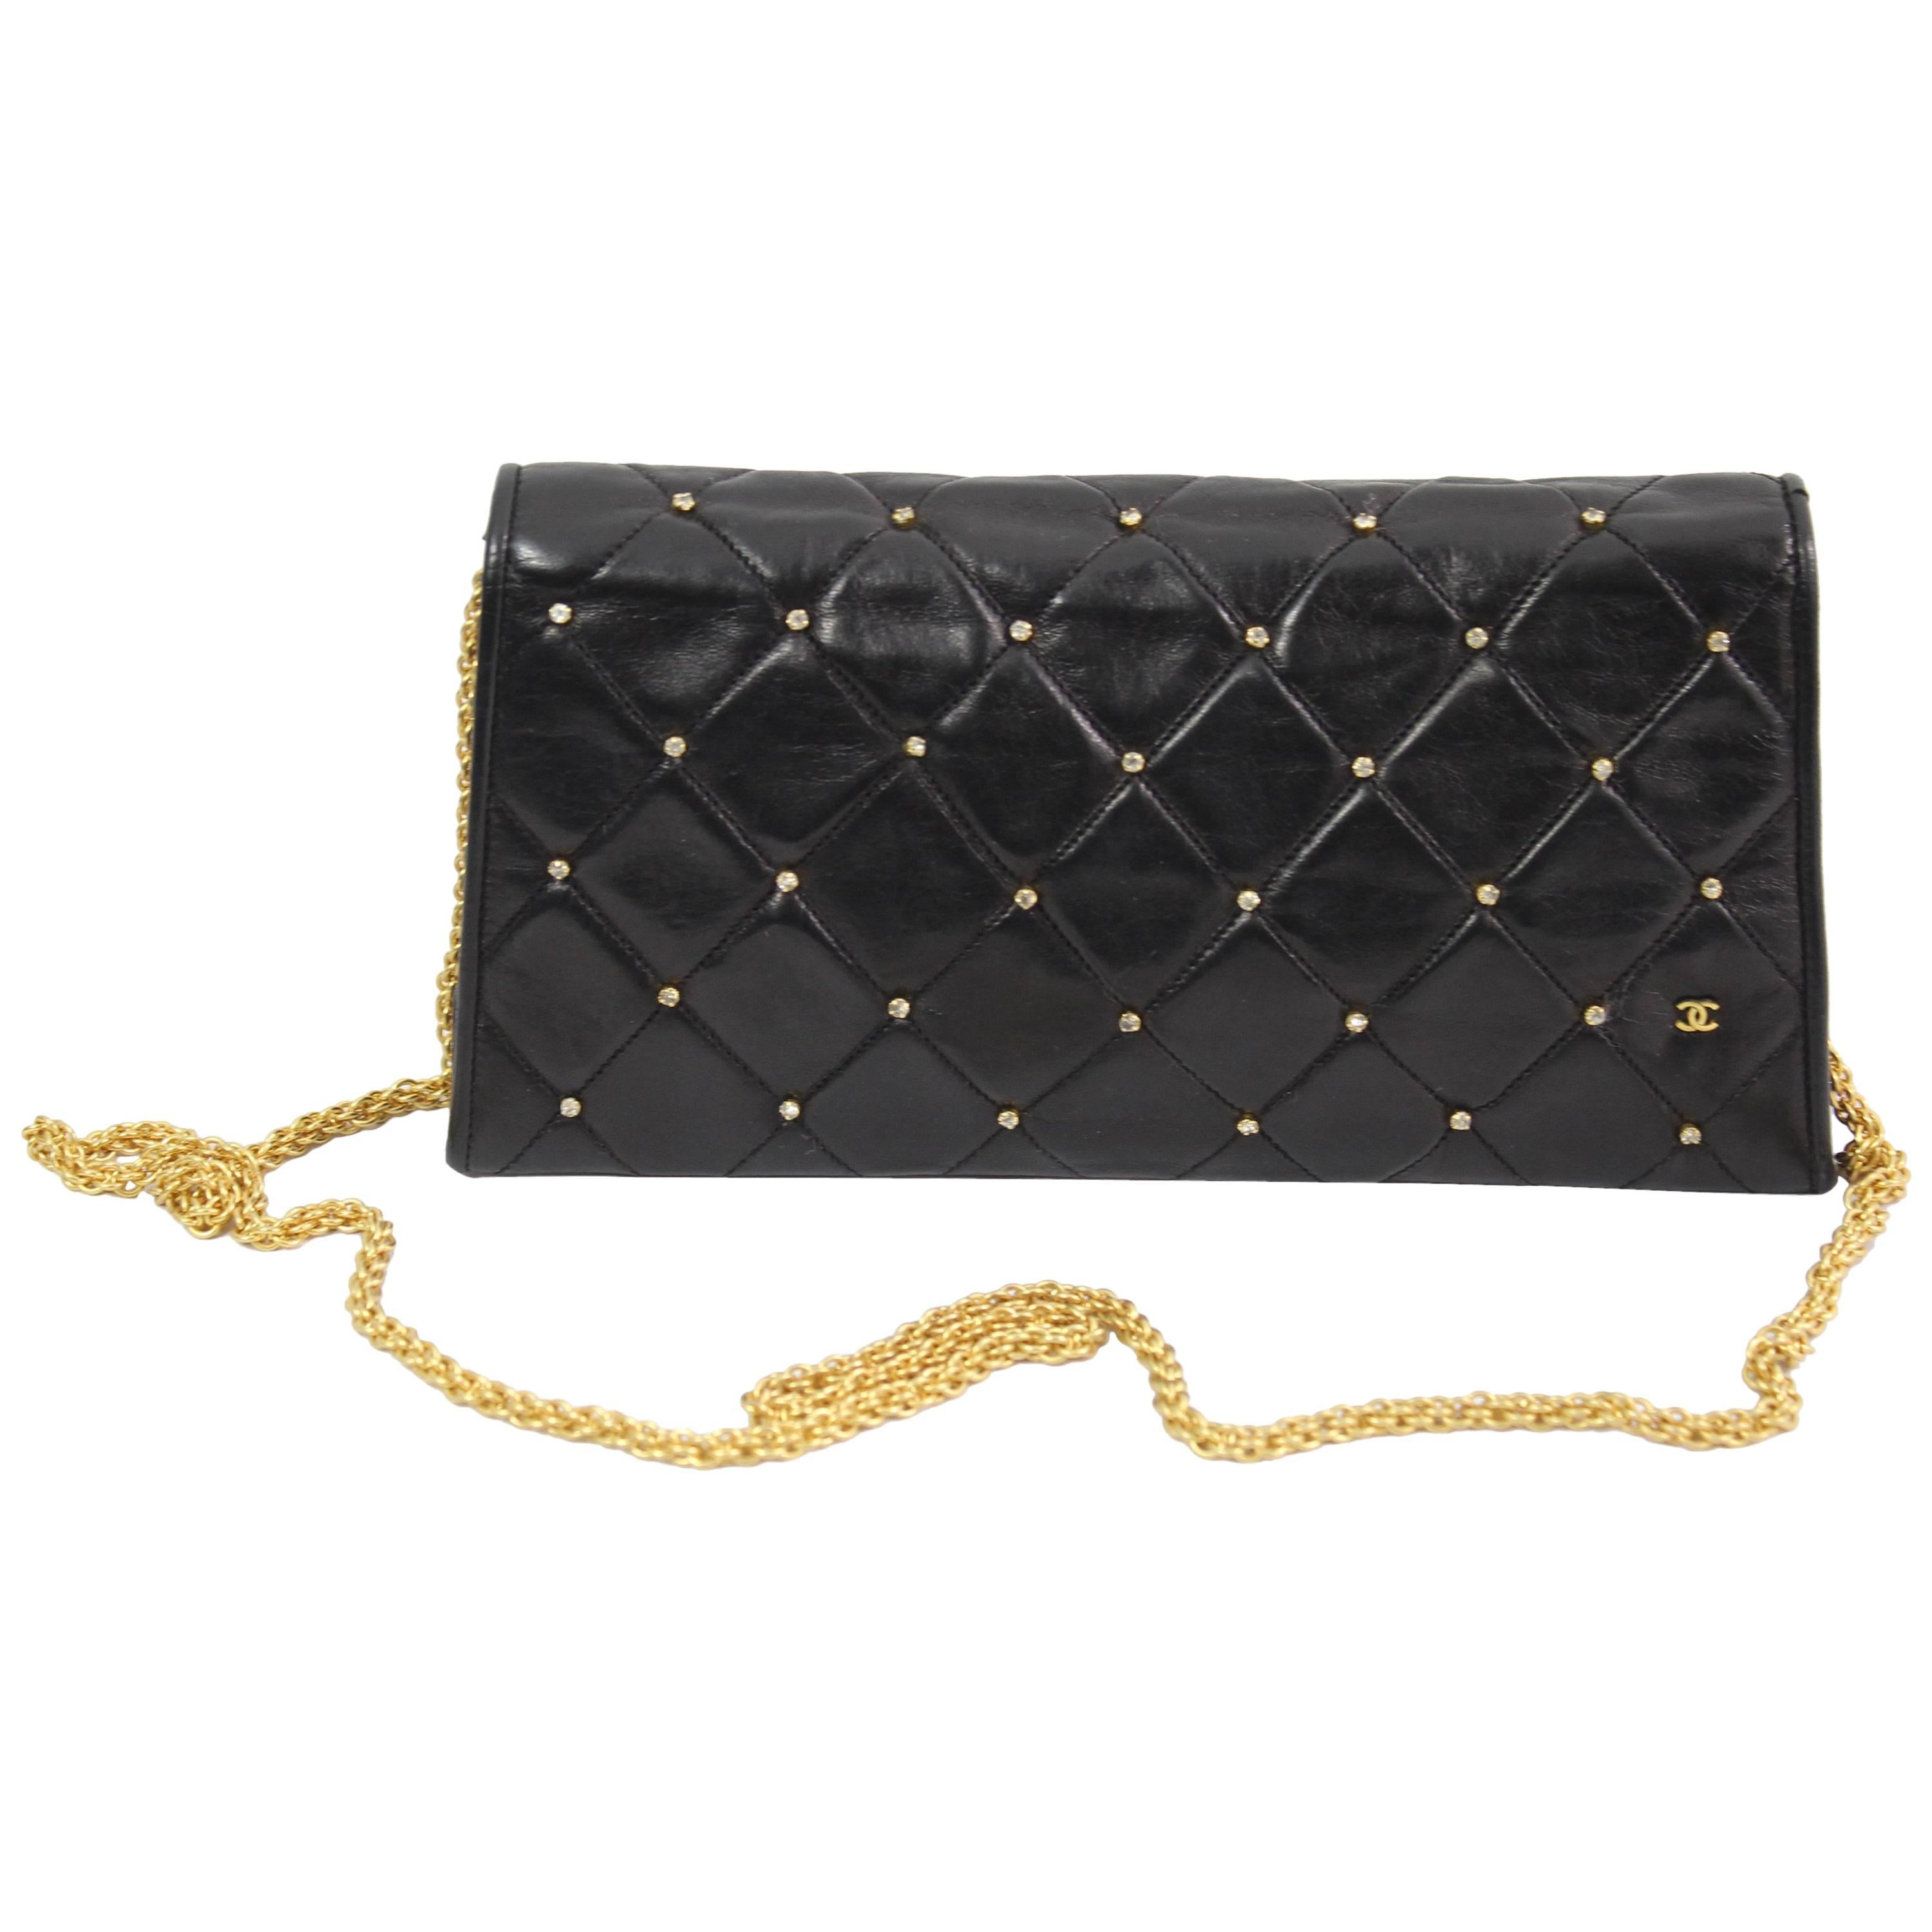 Chanel Black Quilted Lambskin Leather Wallet on Chain Crossbody Bag 